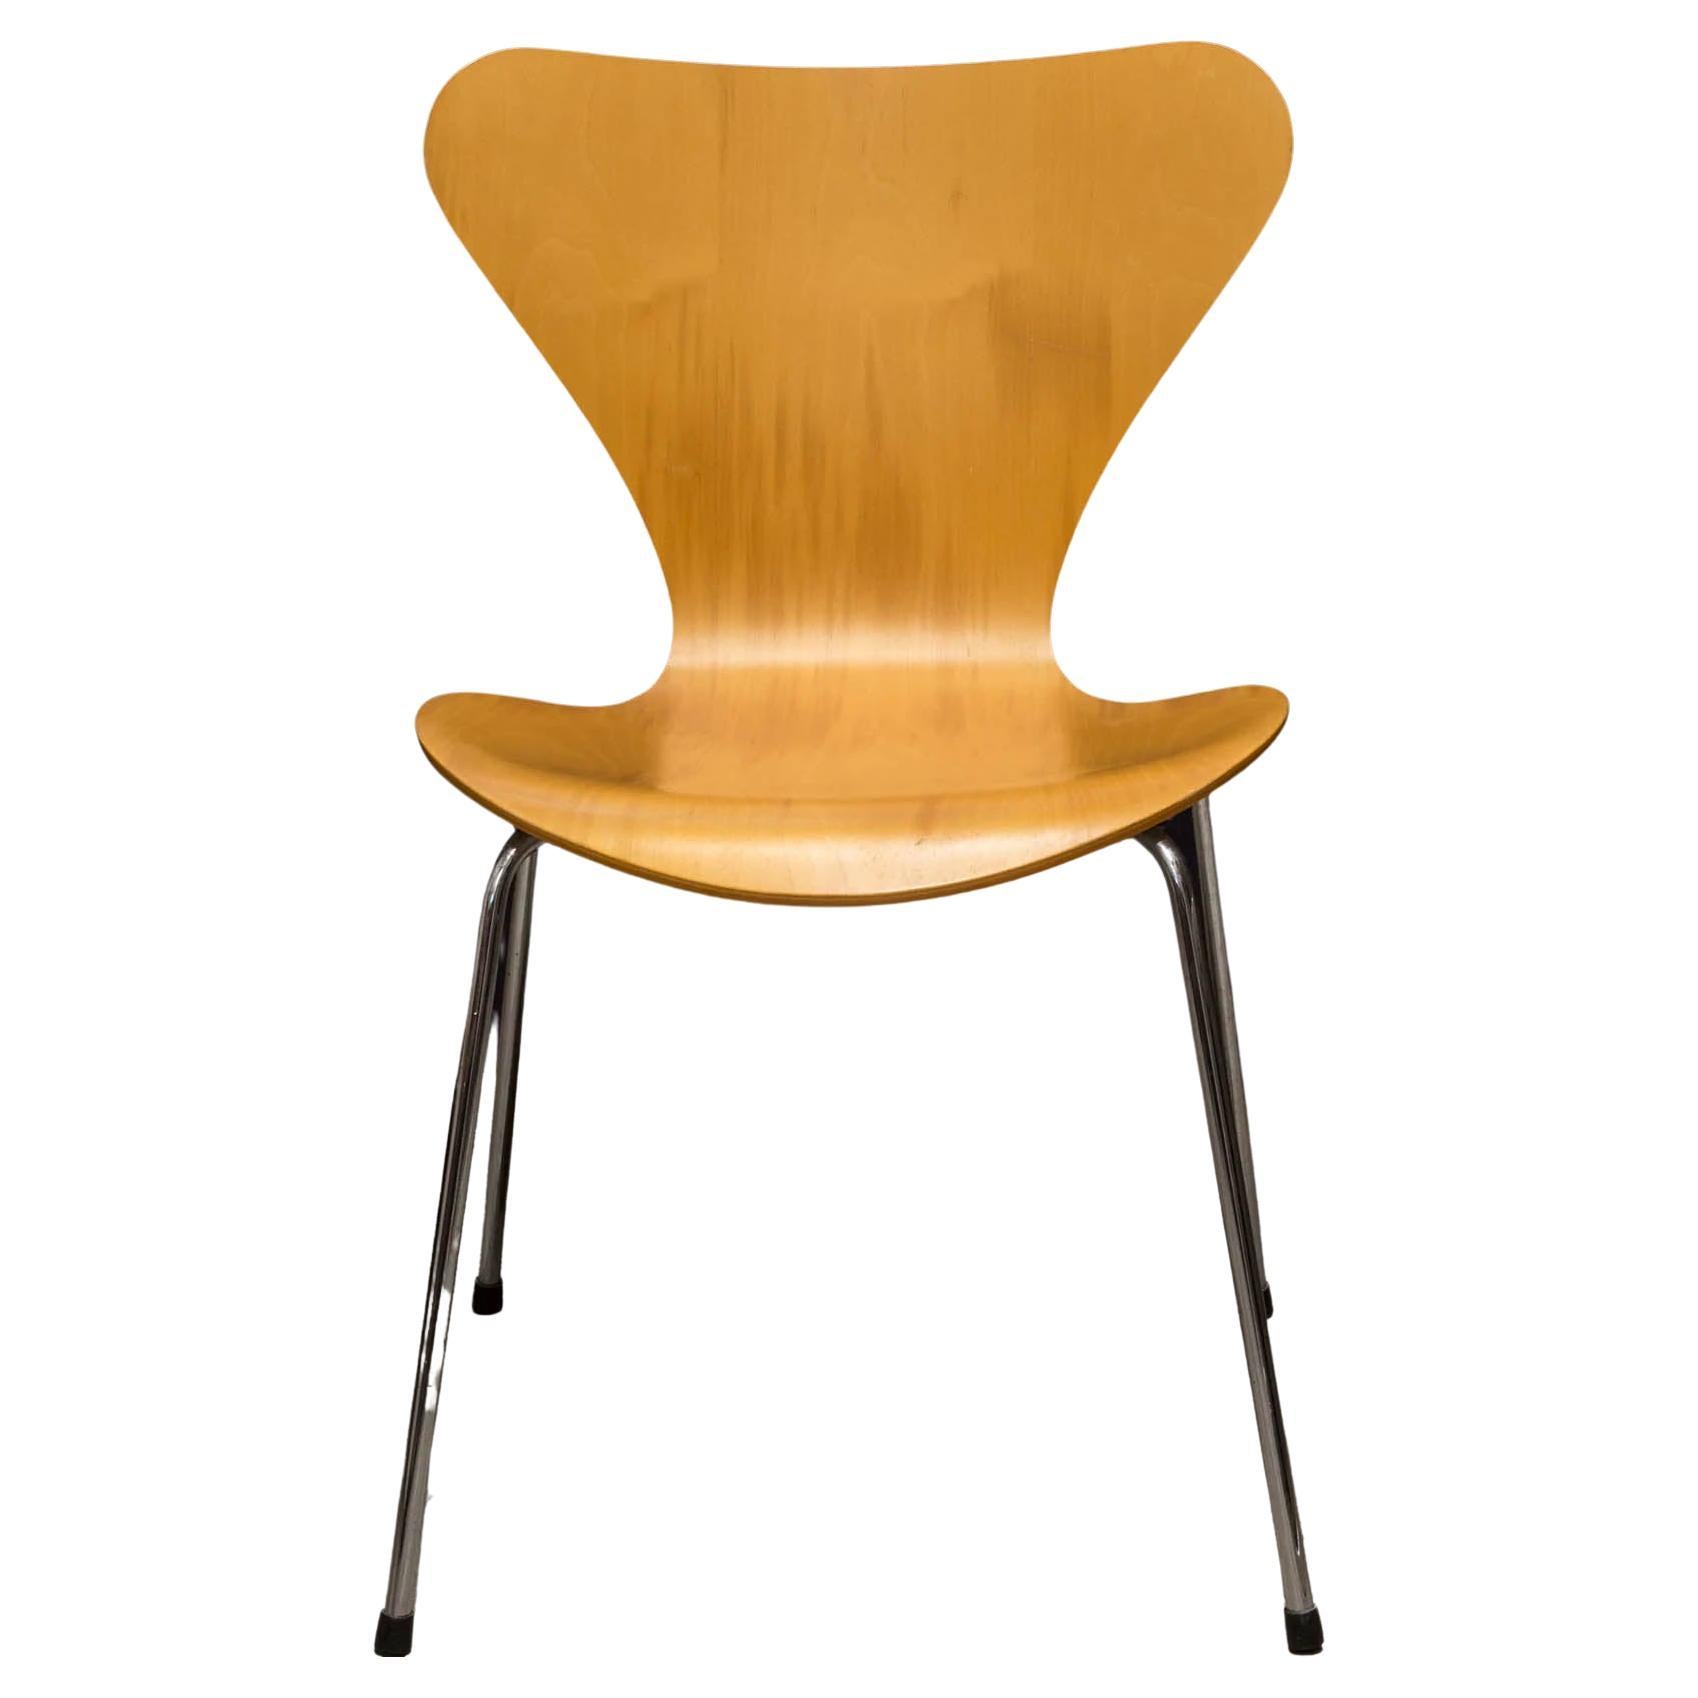 Iconic chair of the Danish design movement, the Series 7 Chair was designed by Arne Jacobsen and produced by Fritz Hansen.
Multiple available.